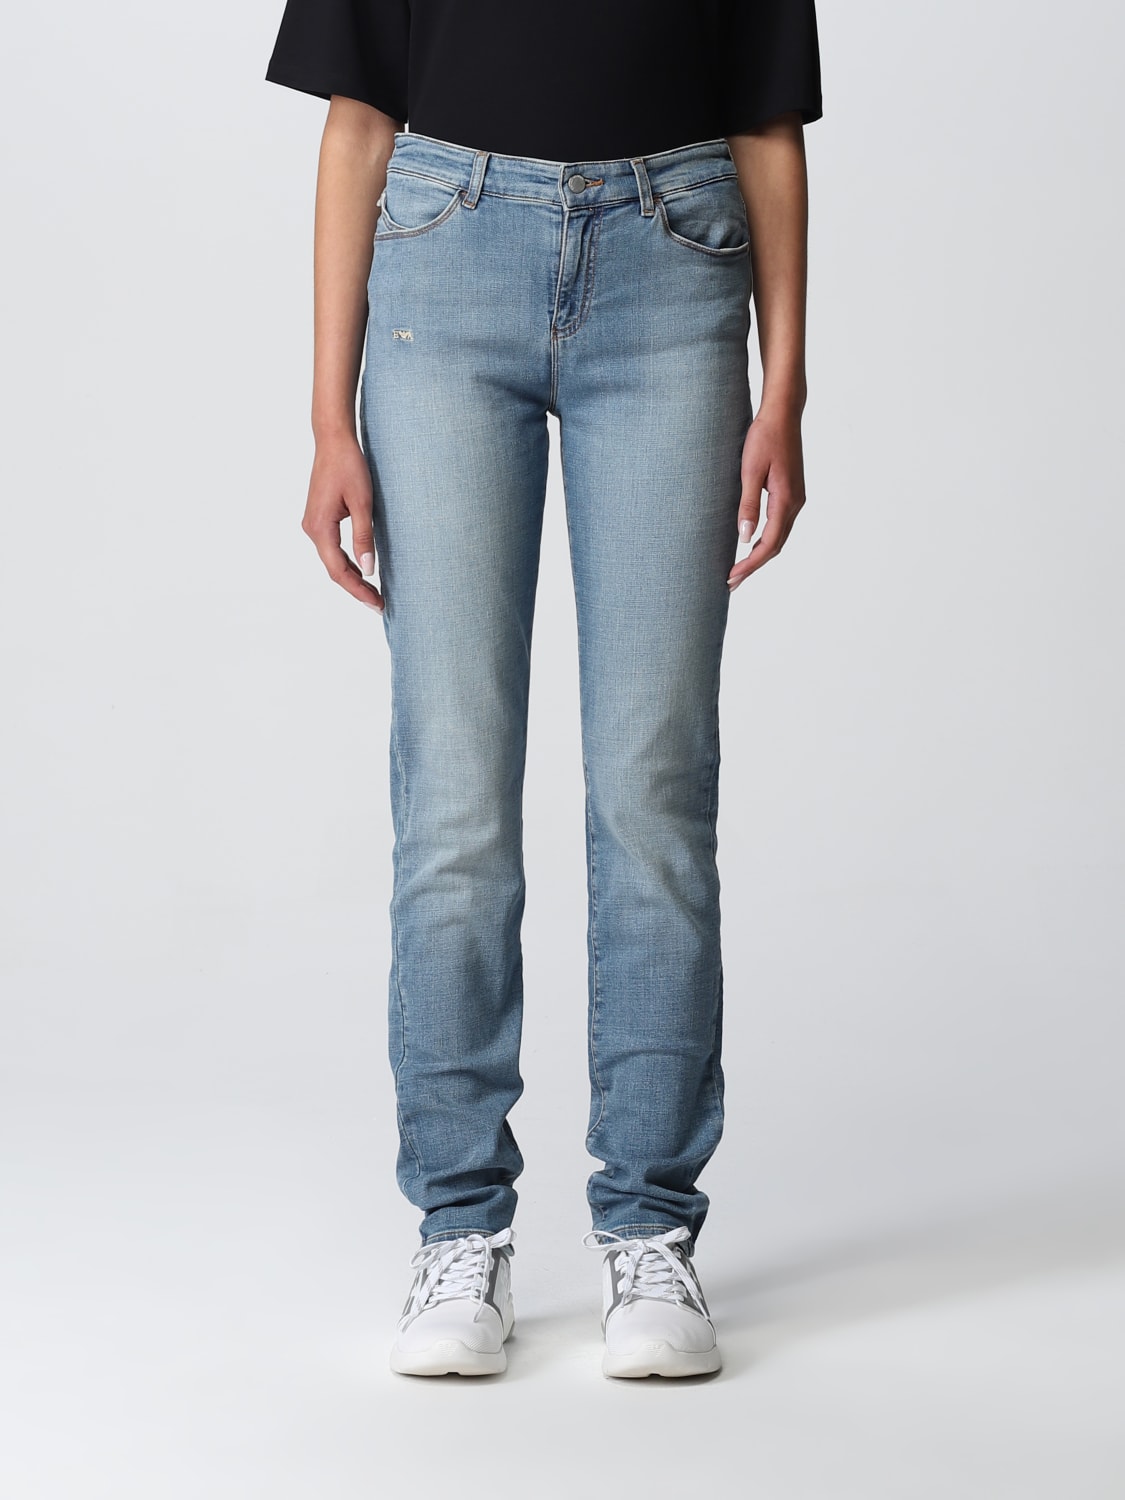 Emporio Armani Outlet: jeans in washed denim - Denim | Armani jeans 3L2J182DQ0Z online at GIGLIO.COM